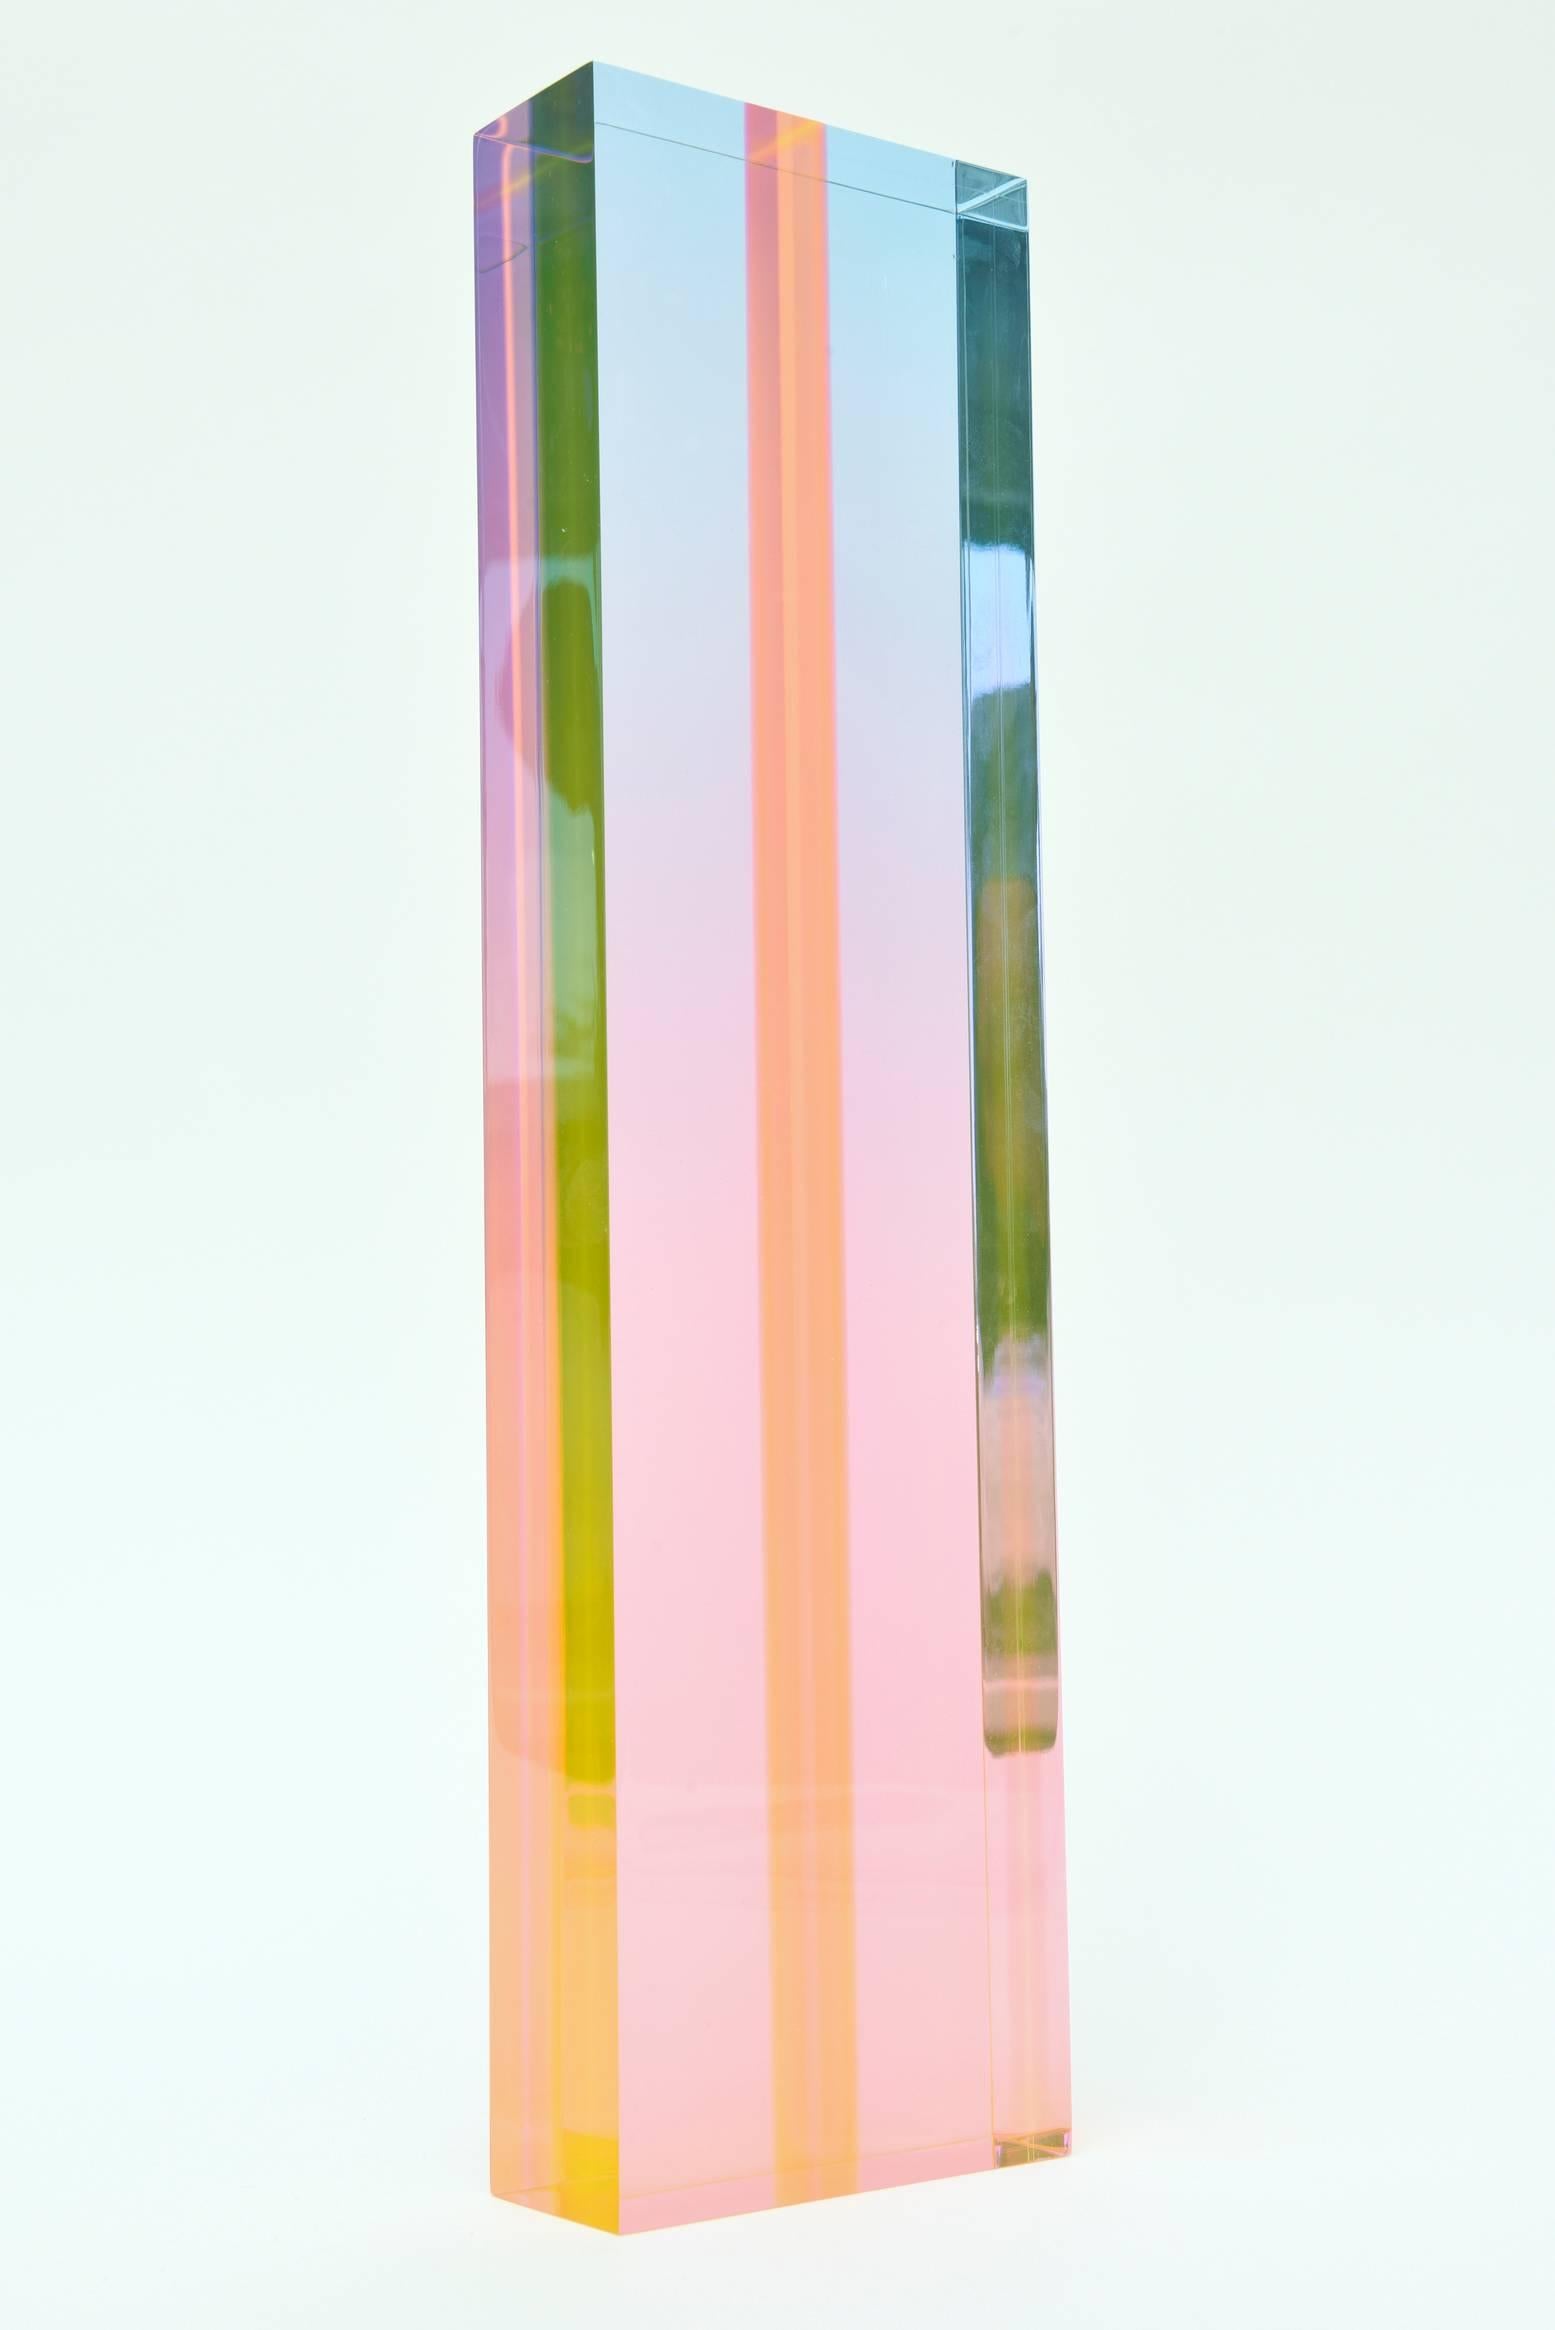 This captivating signed vintage Vasa Lucite tower sculpture is embed with beautiful and subtle planes of color that change with every angle. The colors are soft but ethereal.
It is signed vasa 77 and is entitled pastel ombre although not written on